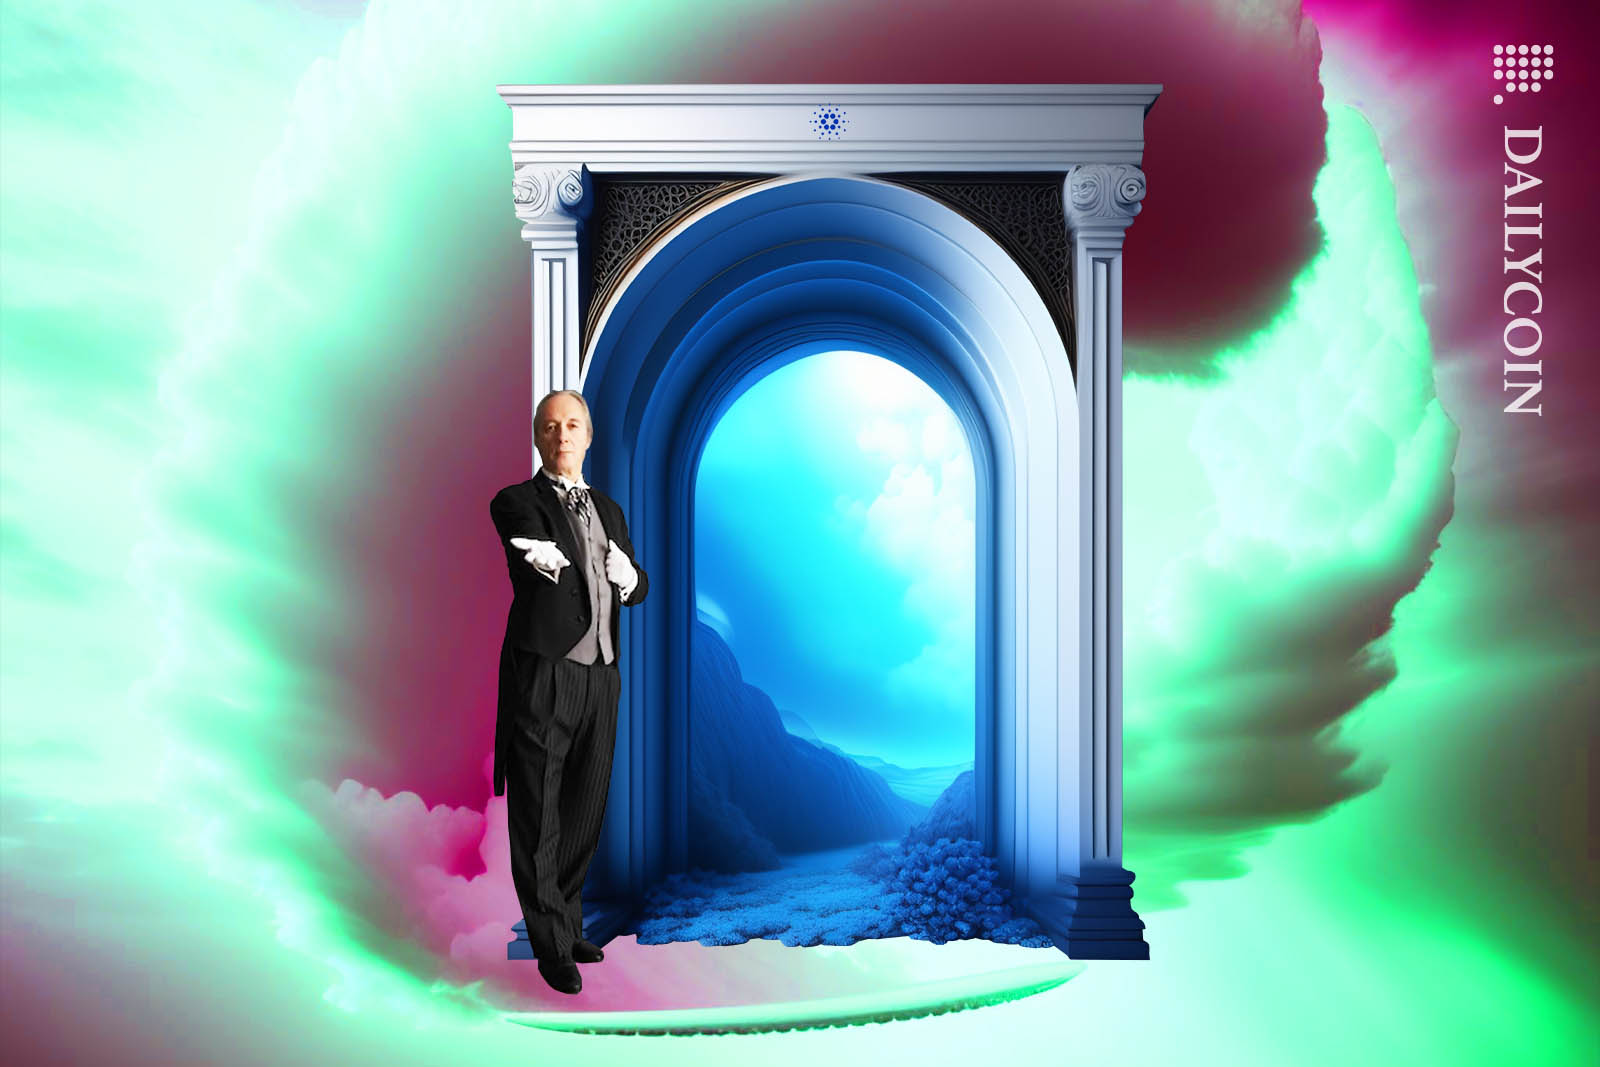 Butler welcoming people through a Cardano branded door, surrounded by clouds.